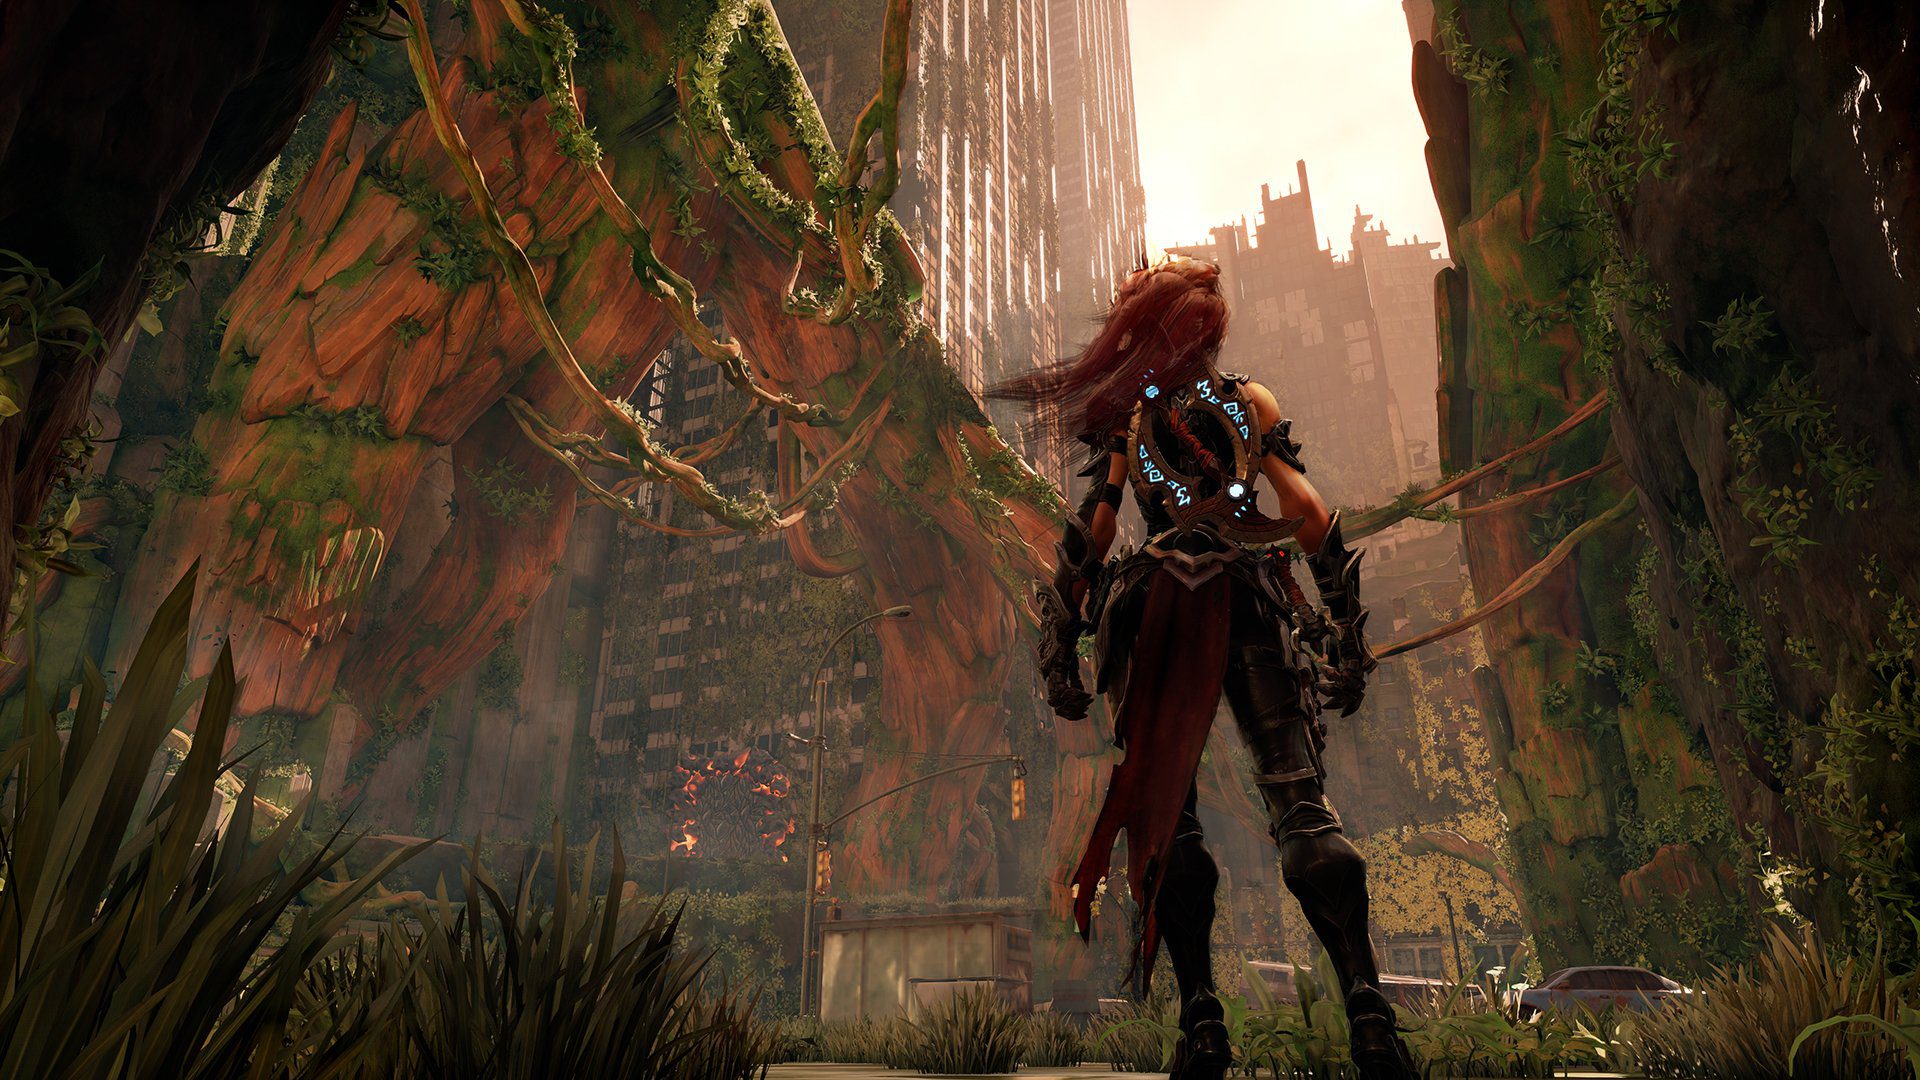 Darksiders III Is On The Way And Features The Horseman FURY